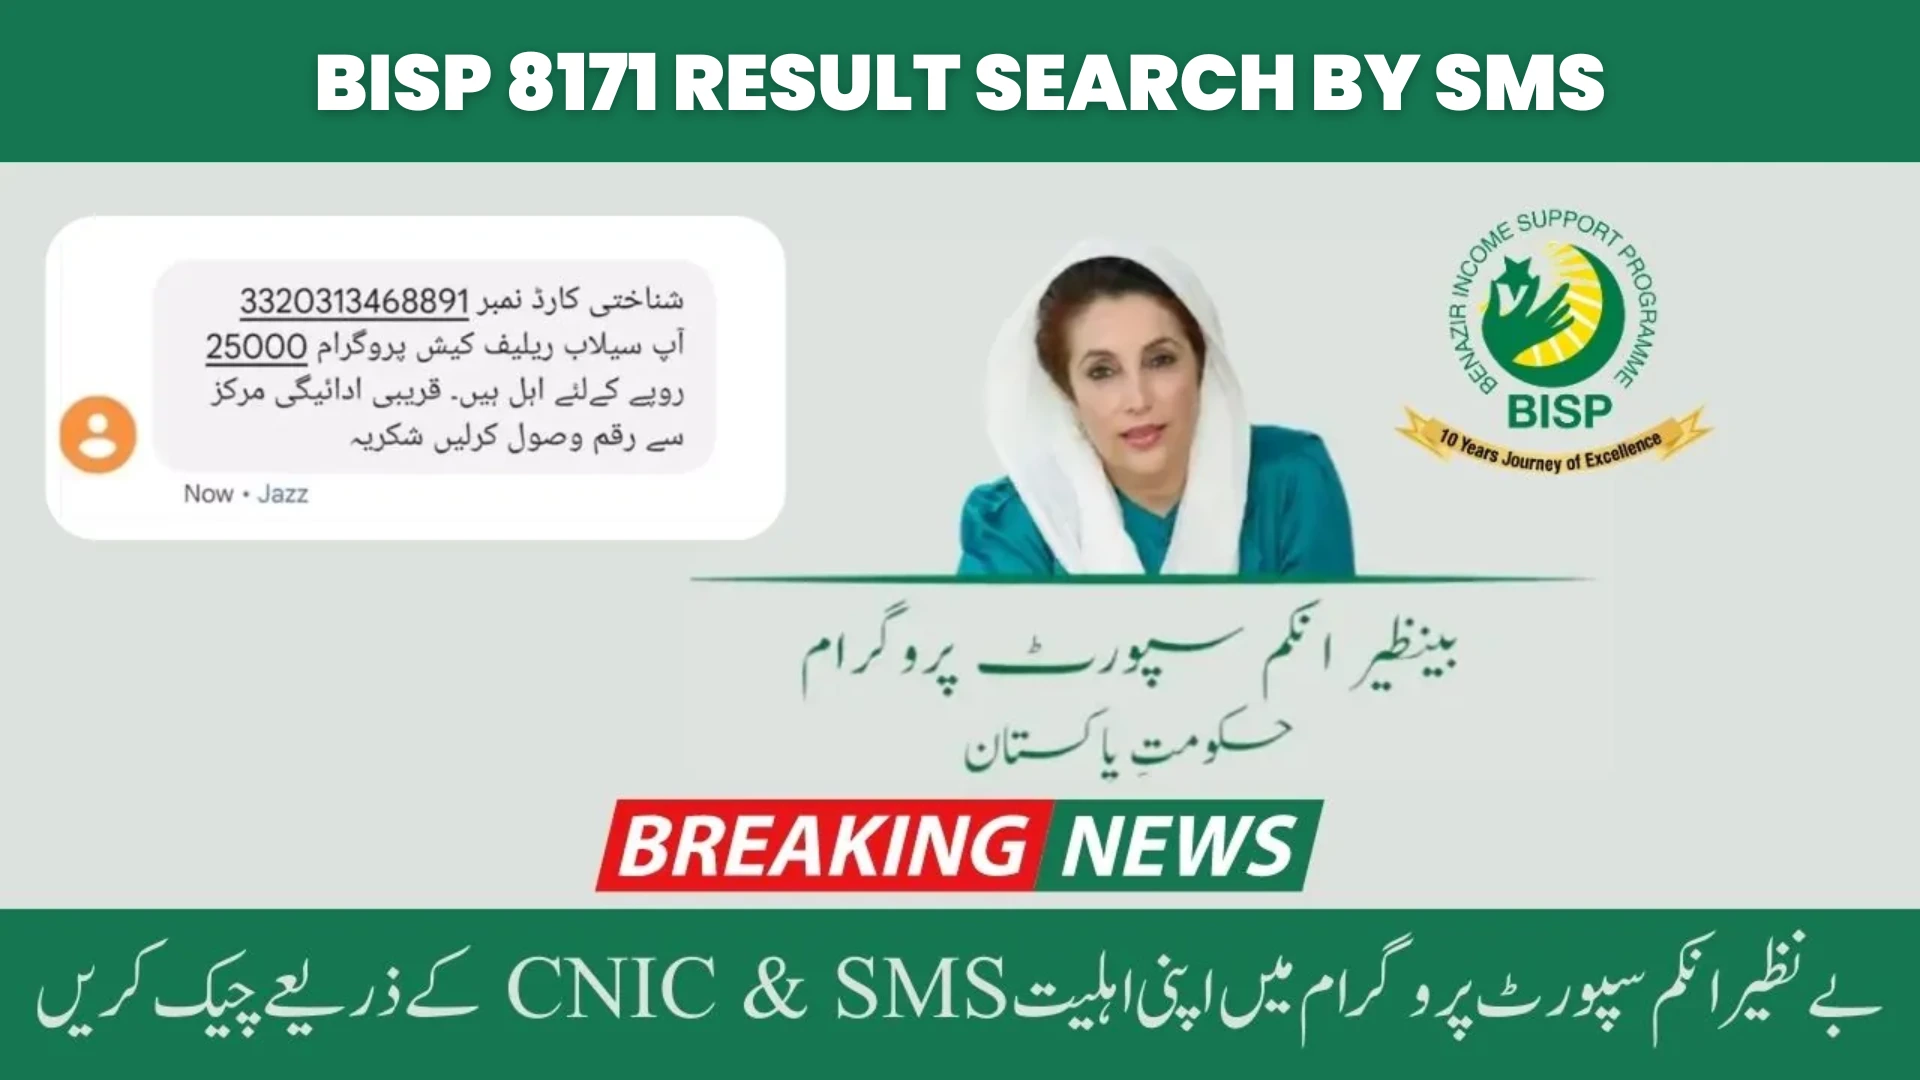 BISP 8171 Result Search by SMS